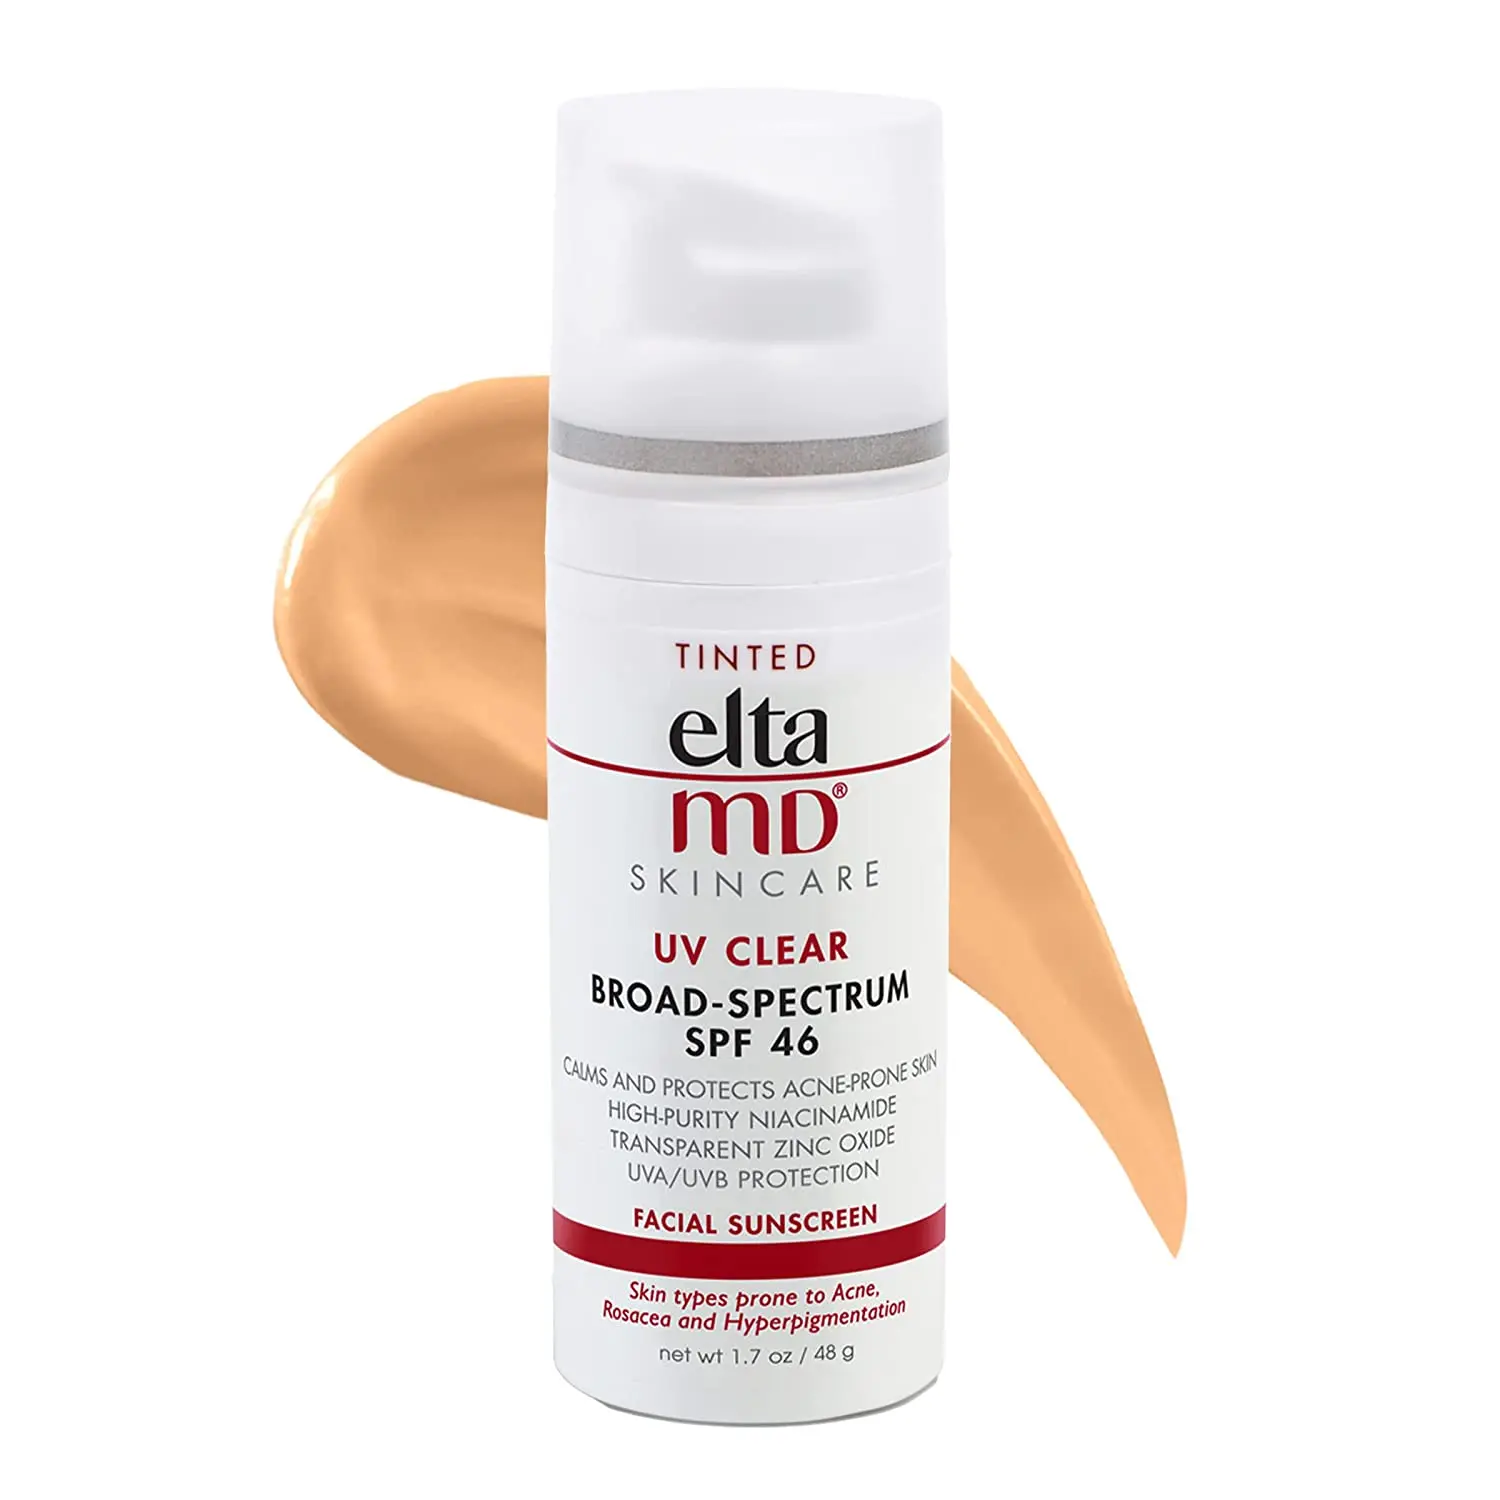 

Elta MD UV SPF46 Tinted Face Sunscreen Broad-Spectrum Makeup Isolation Face Sunscreen for Sensitive Skin Prone to Acne 1.7 oz